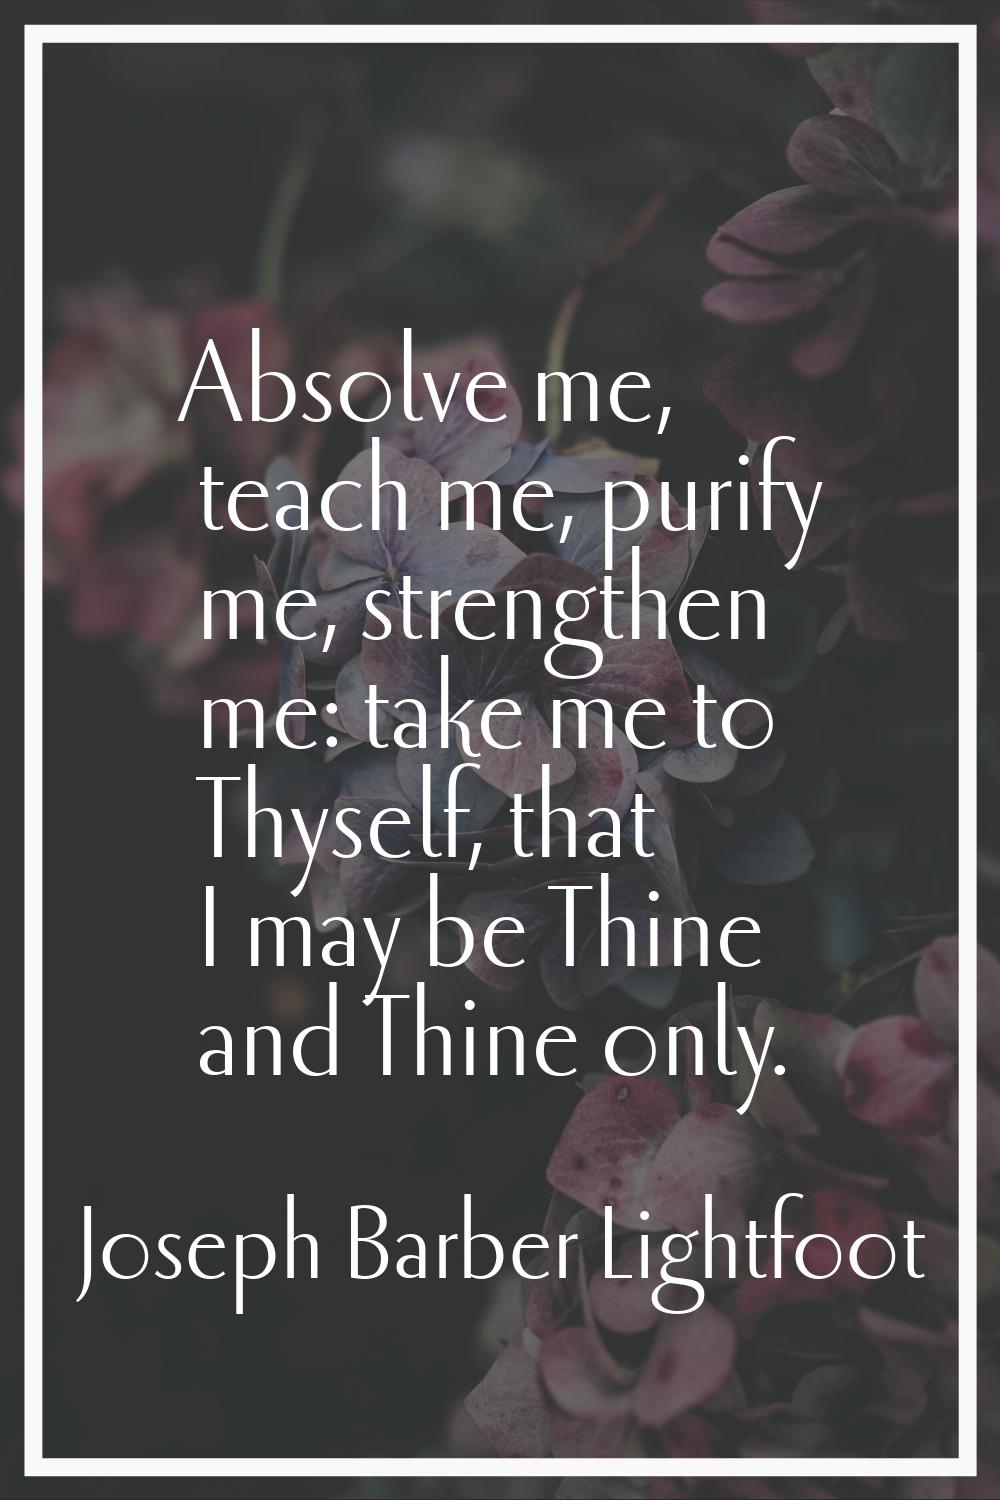 Absolve me, teach me, purify me, strengthen me: take me to Thyself, that I may be Thine and Thine o